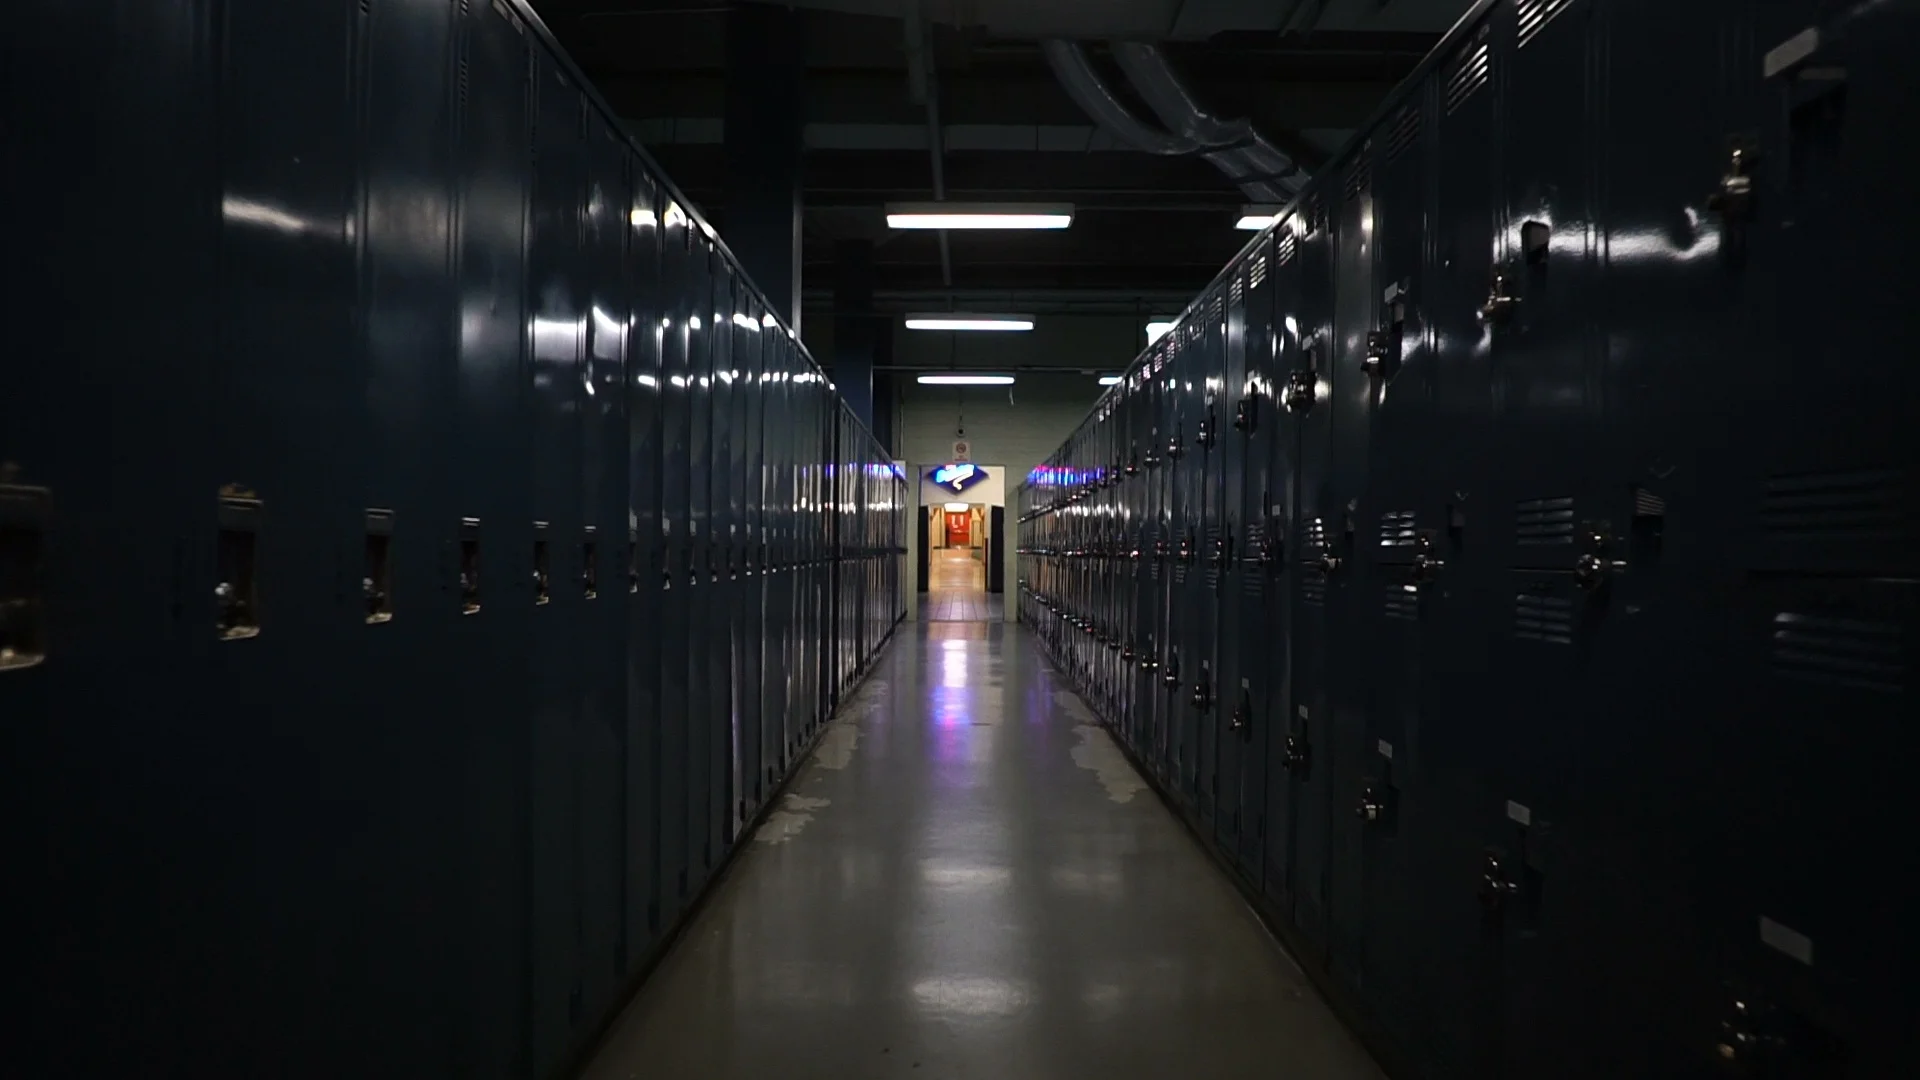 school hallway with students and lockers